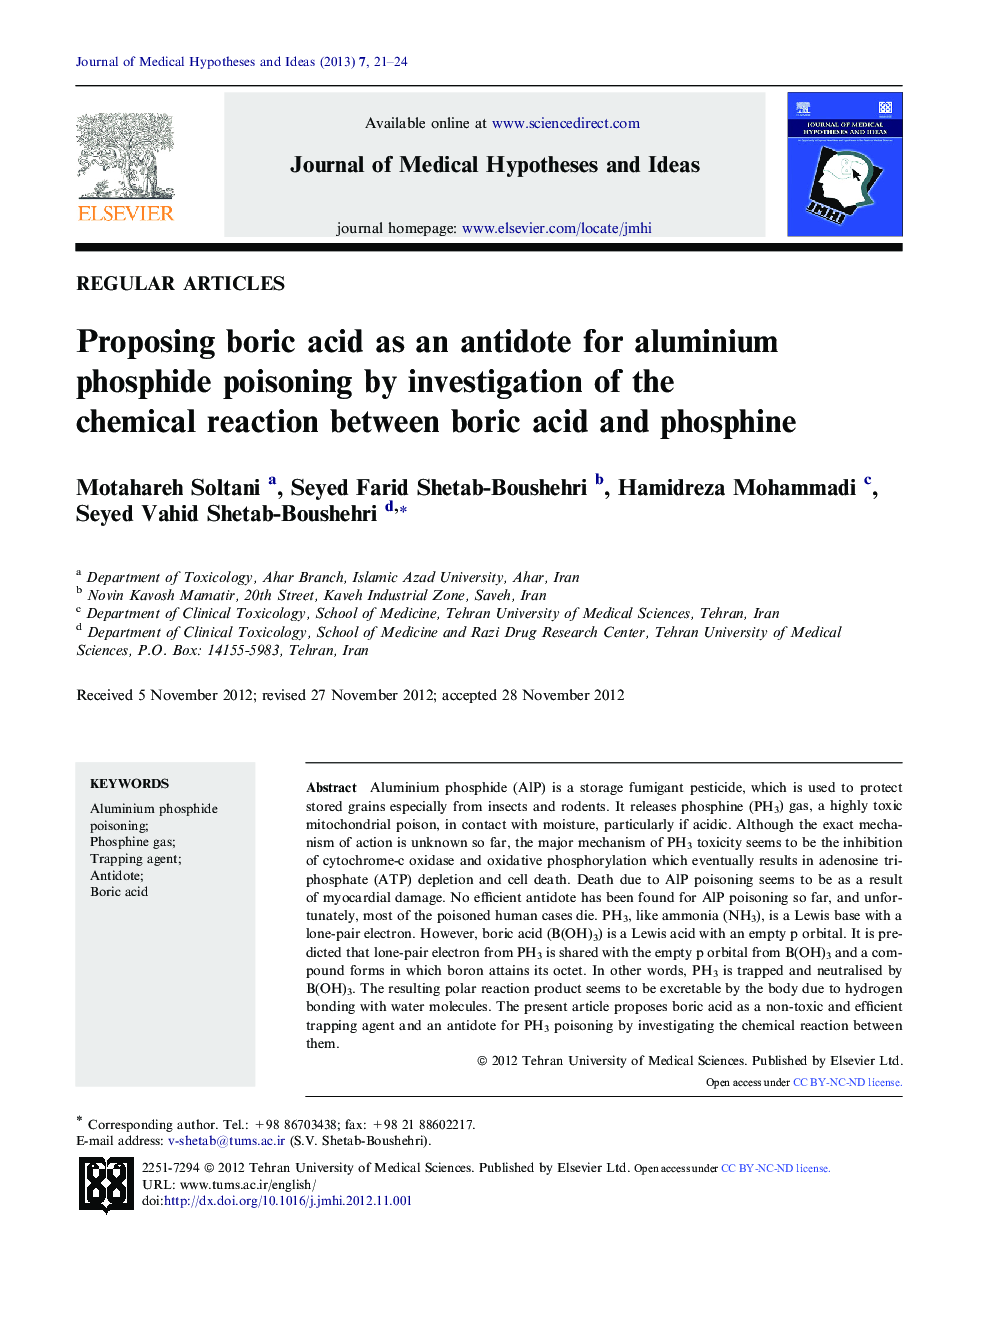 Proposing boric acid as an antidote for aluminium phosphide poisoning by investigation of the chemical reaction between boric acid and phosphine